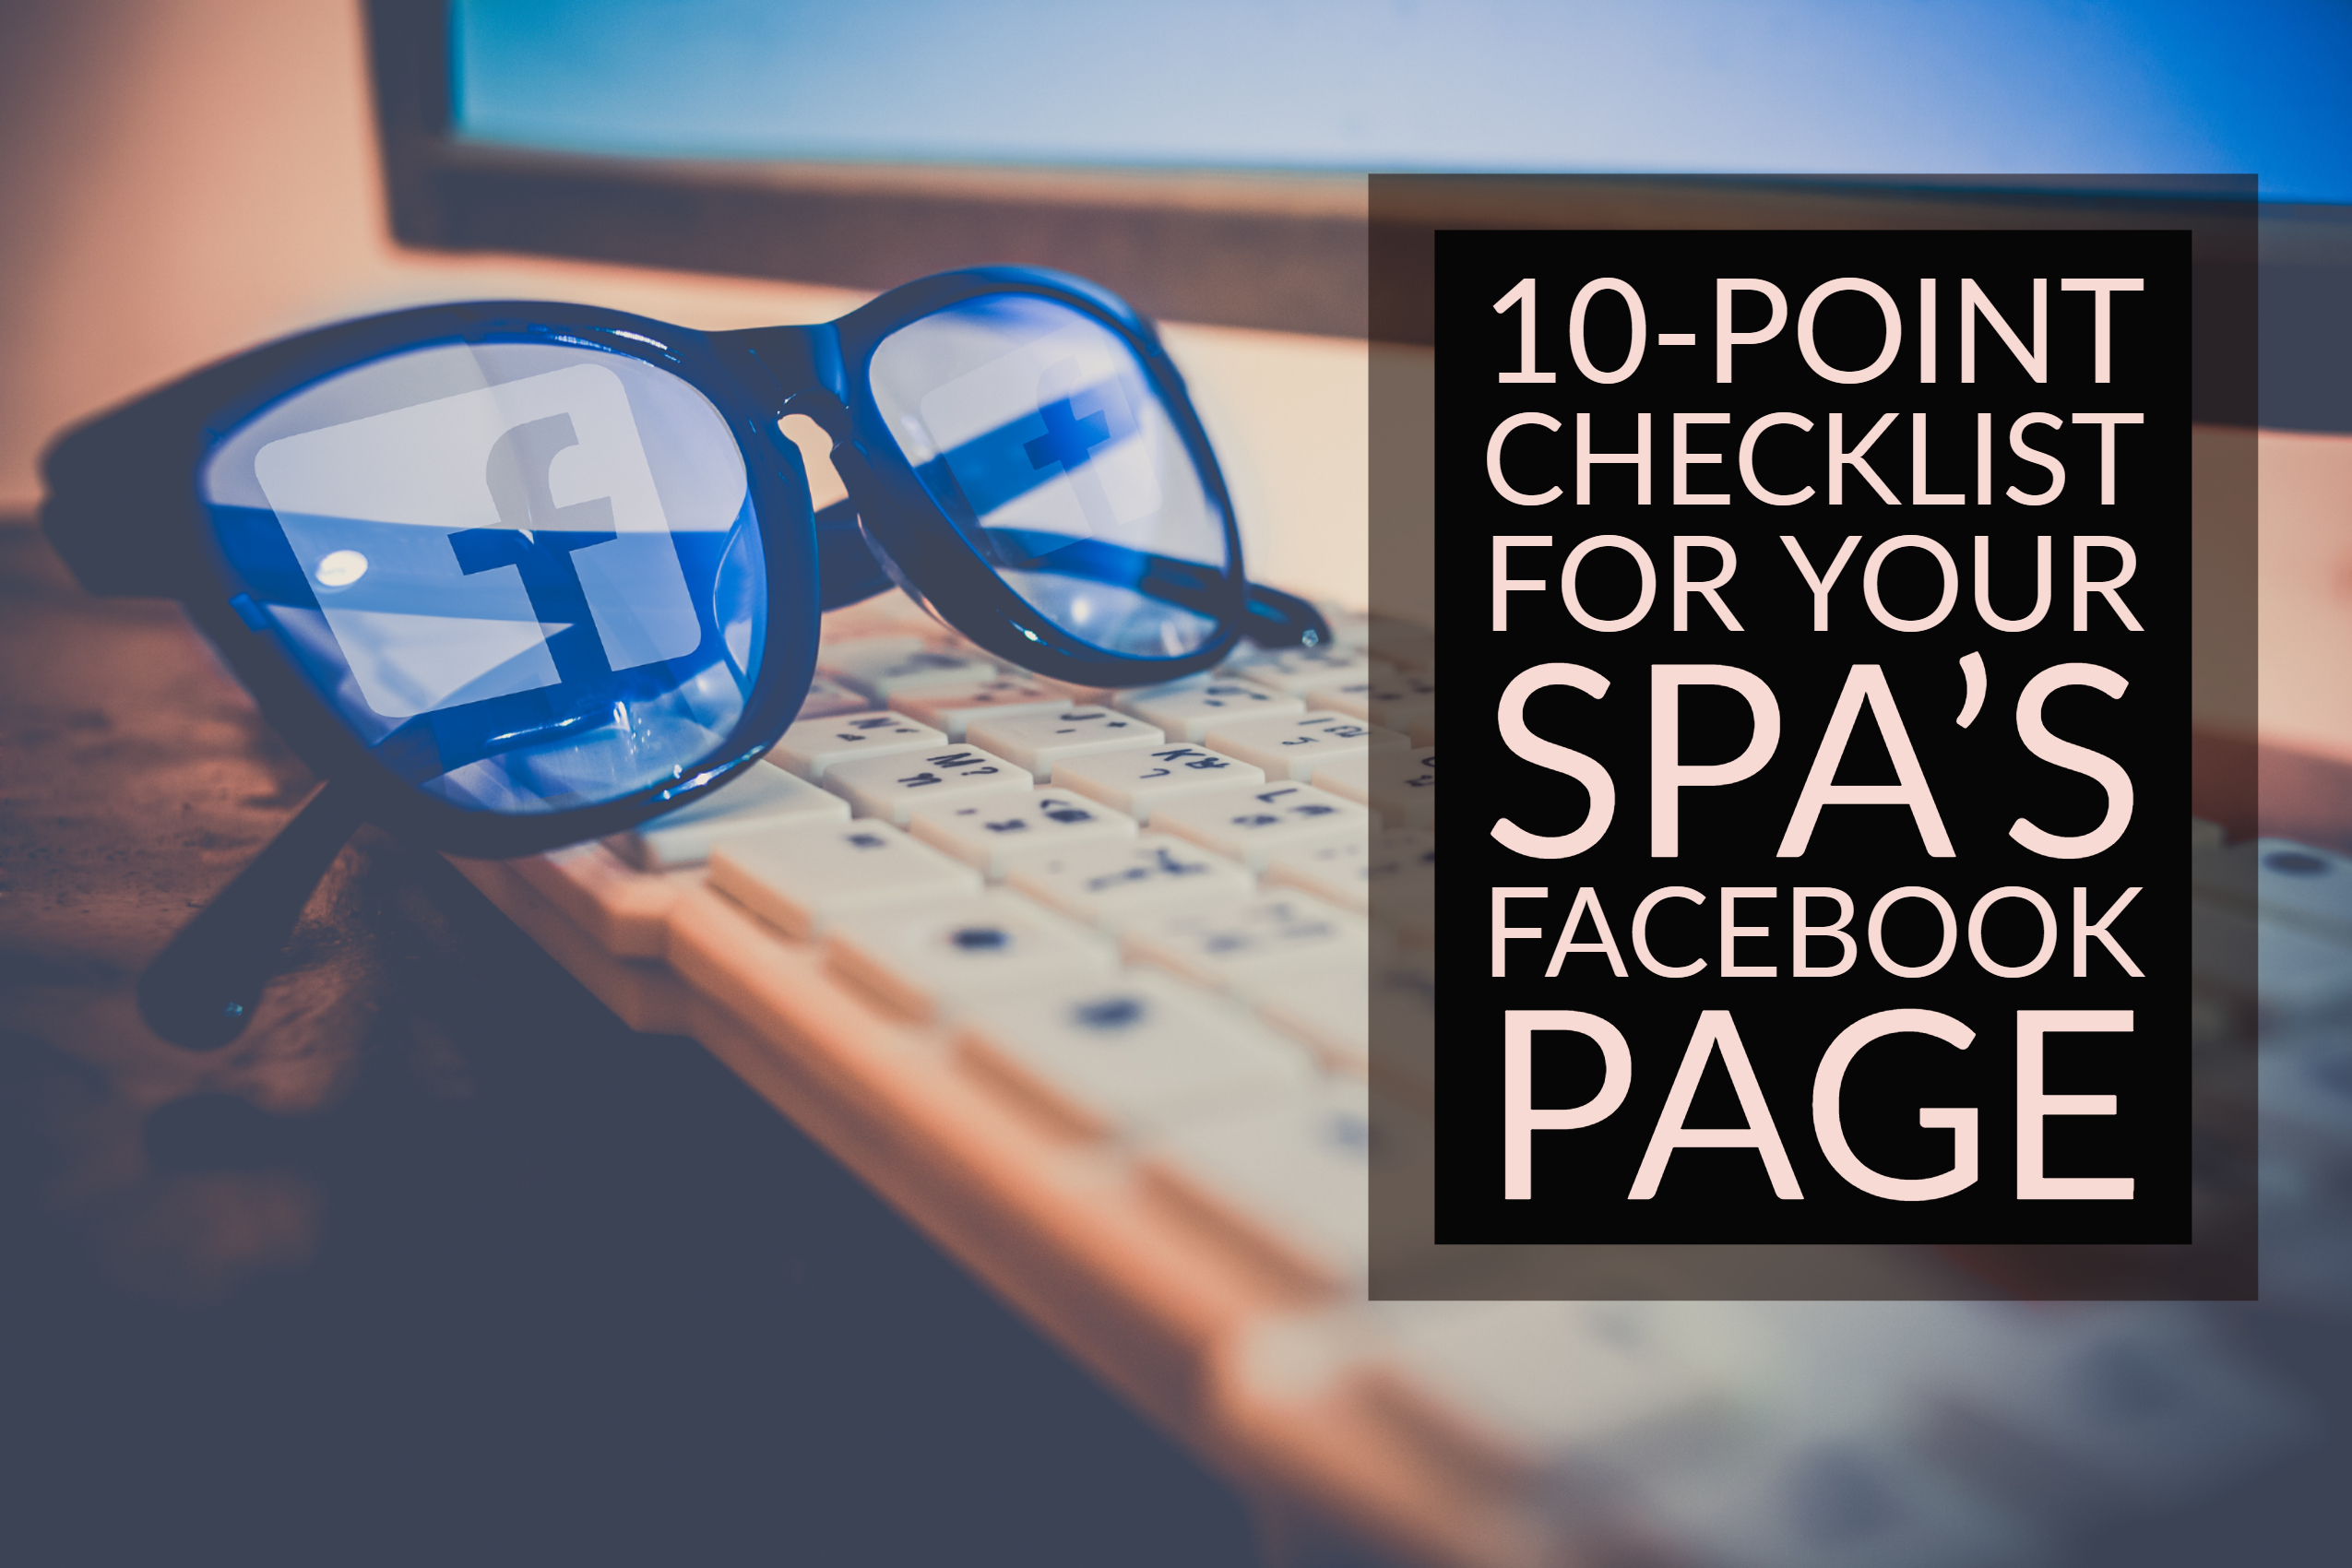 10-Point Checklist For Your Spa’s Facebook Page